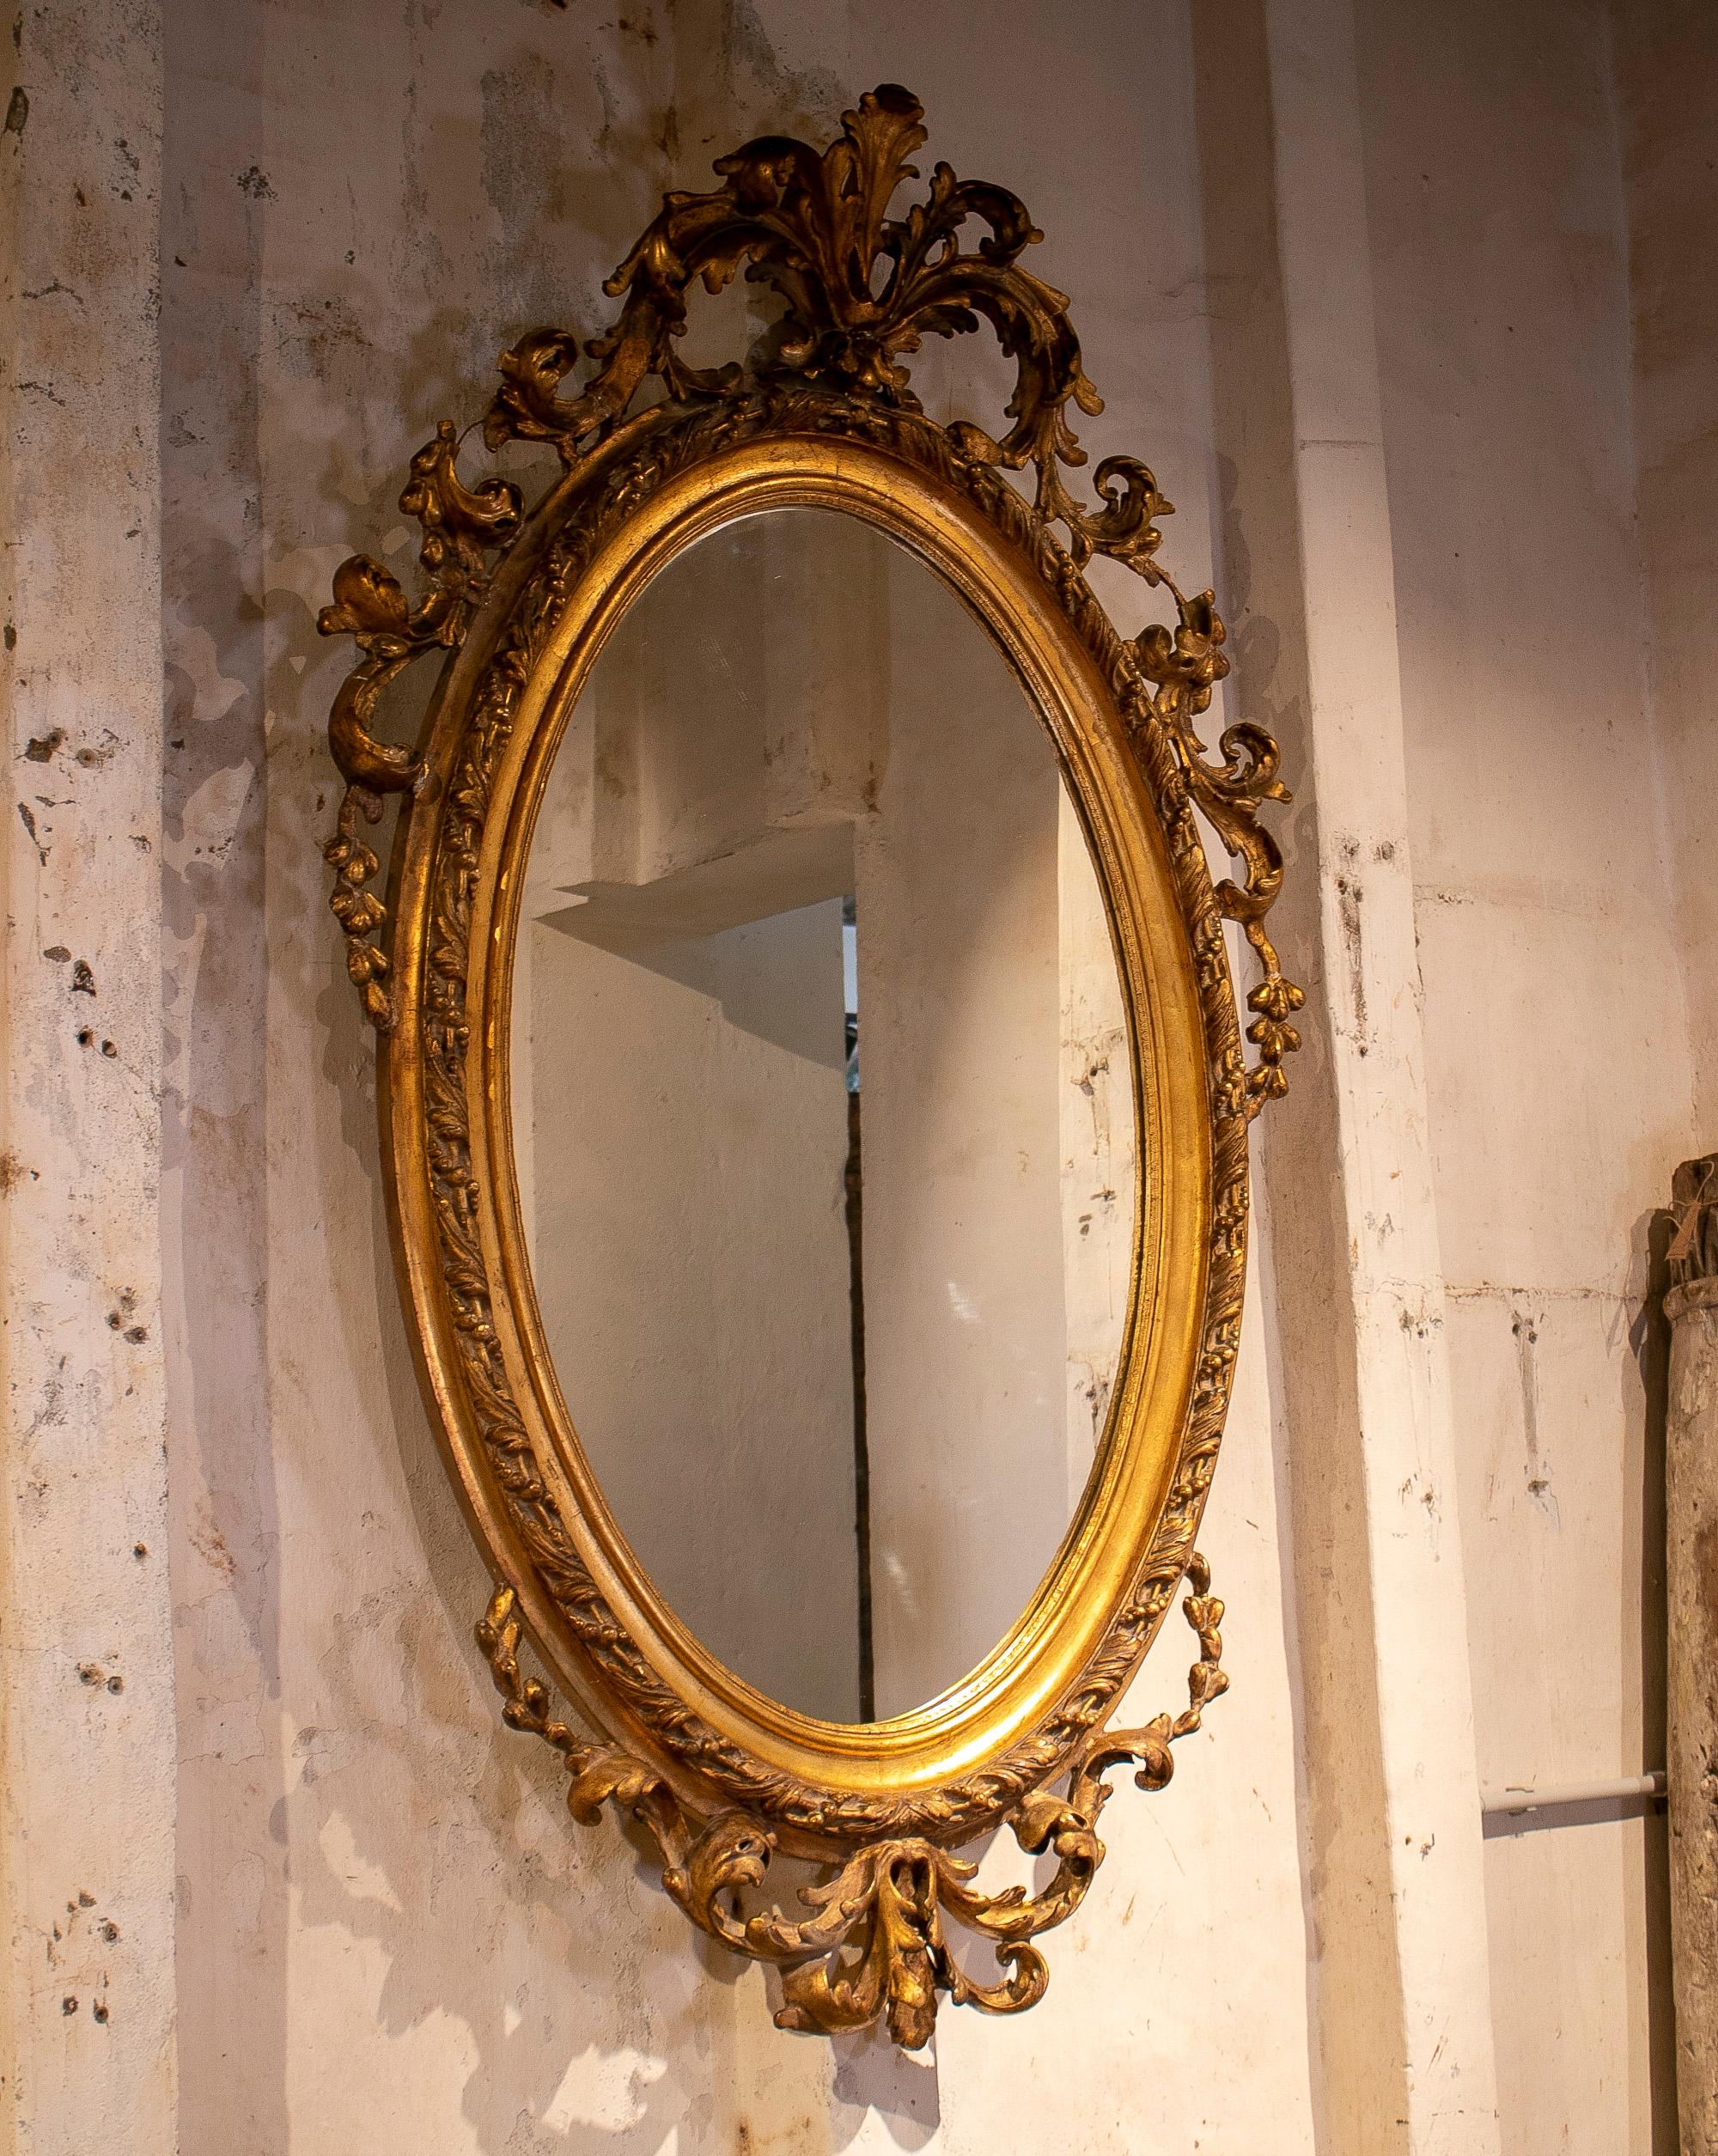 19th century French gold giltwood oval mirror with crest, decorated with late Baroque Rococo rocaille.